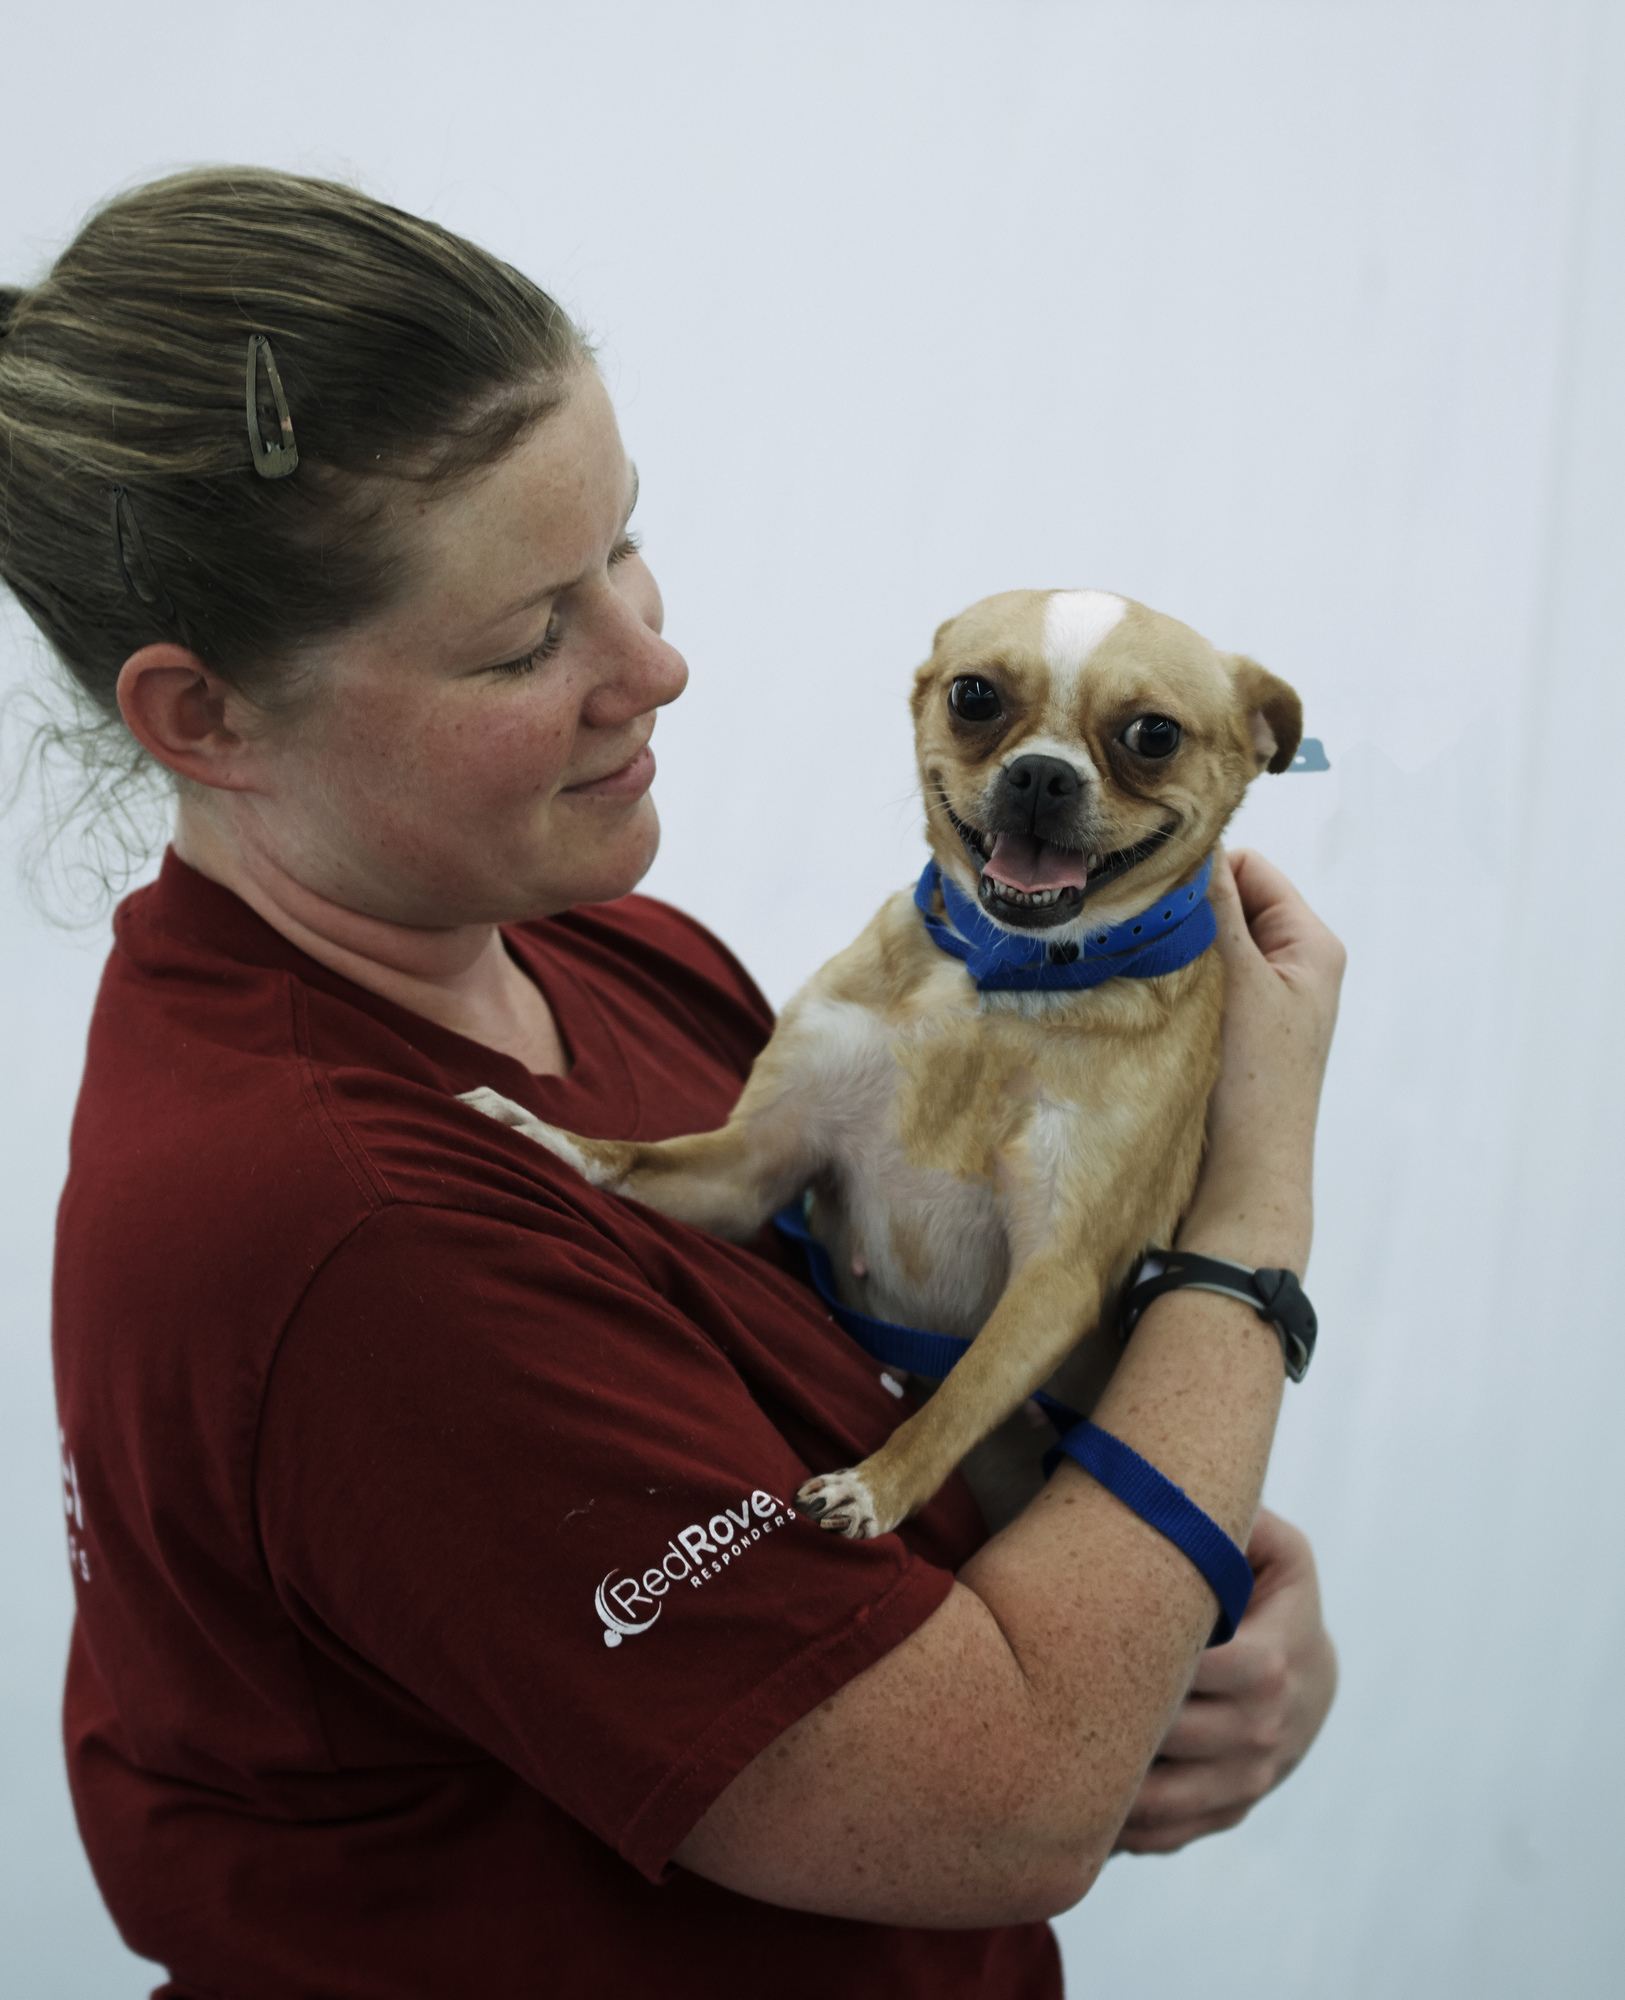 A volunteer in a red shirt holds a happy pug or chihuahua mix dog